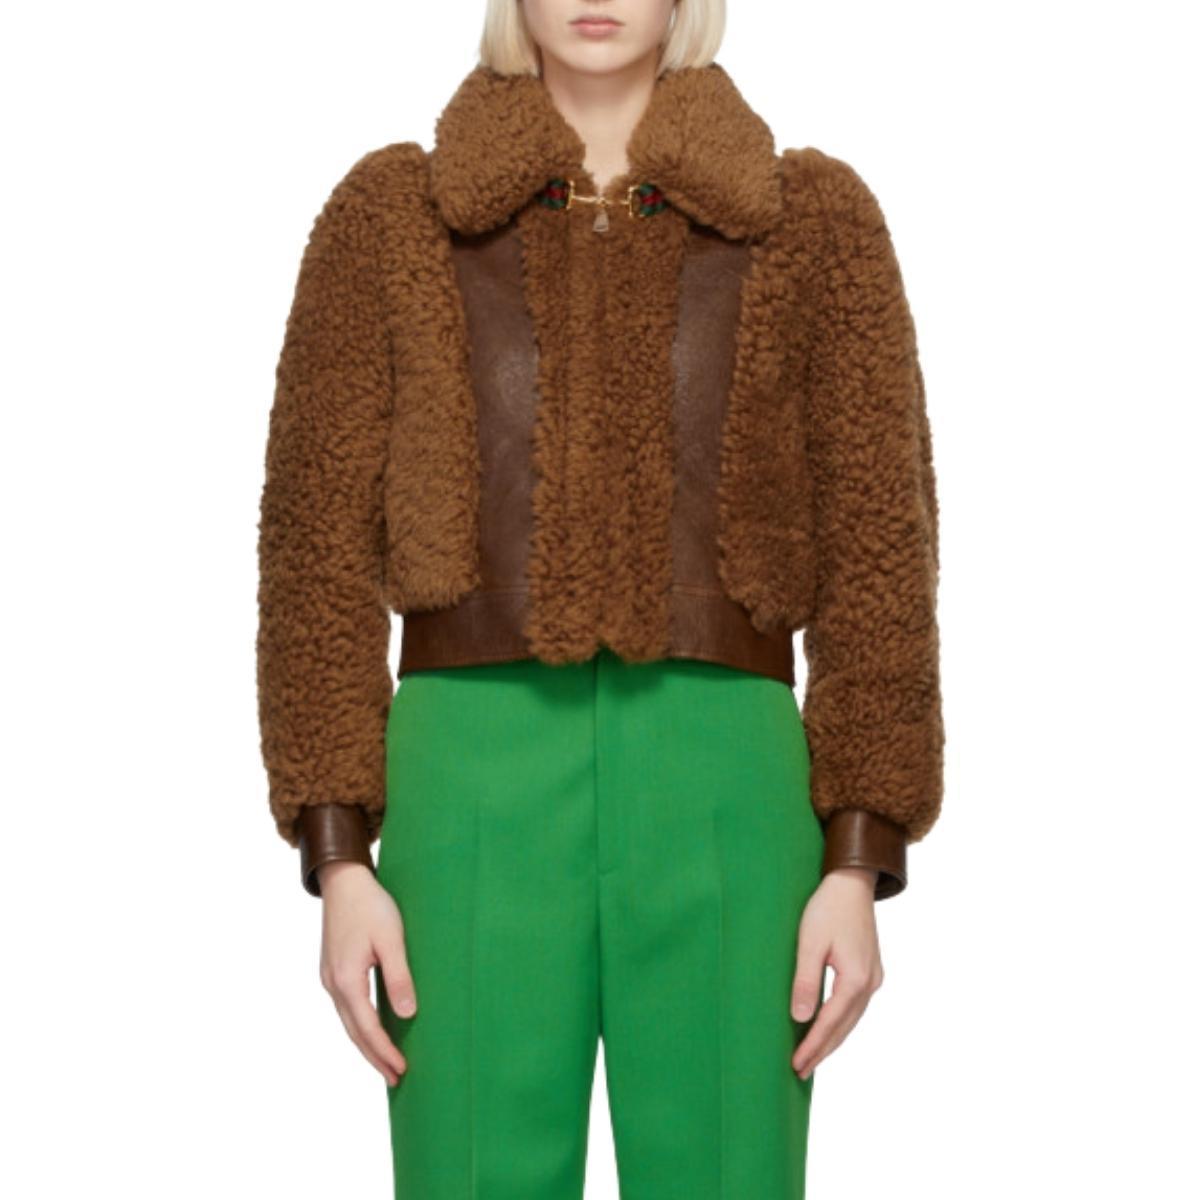 Long sleeve paneled shearling and grained lambskin jacket in brown. 
Grosgrain trim striped in green and red and signature horsebit hardware at spread collar. 
Concealed zip closure at front. 
Single-button barrel cuffs. 
Tonal satin lining. 
Fully